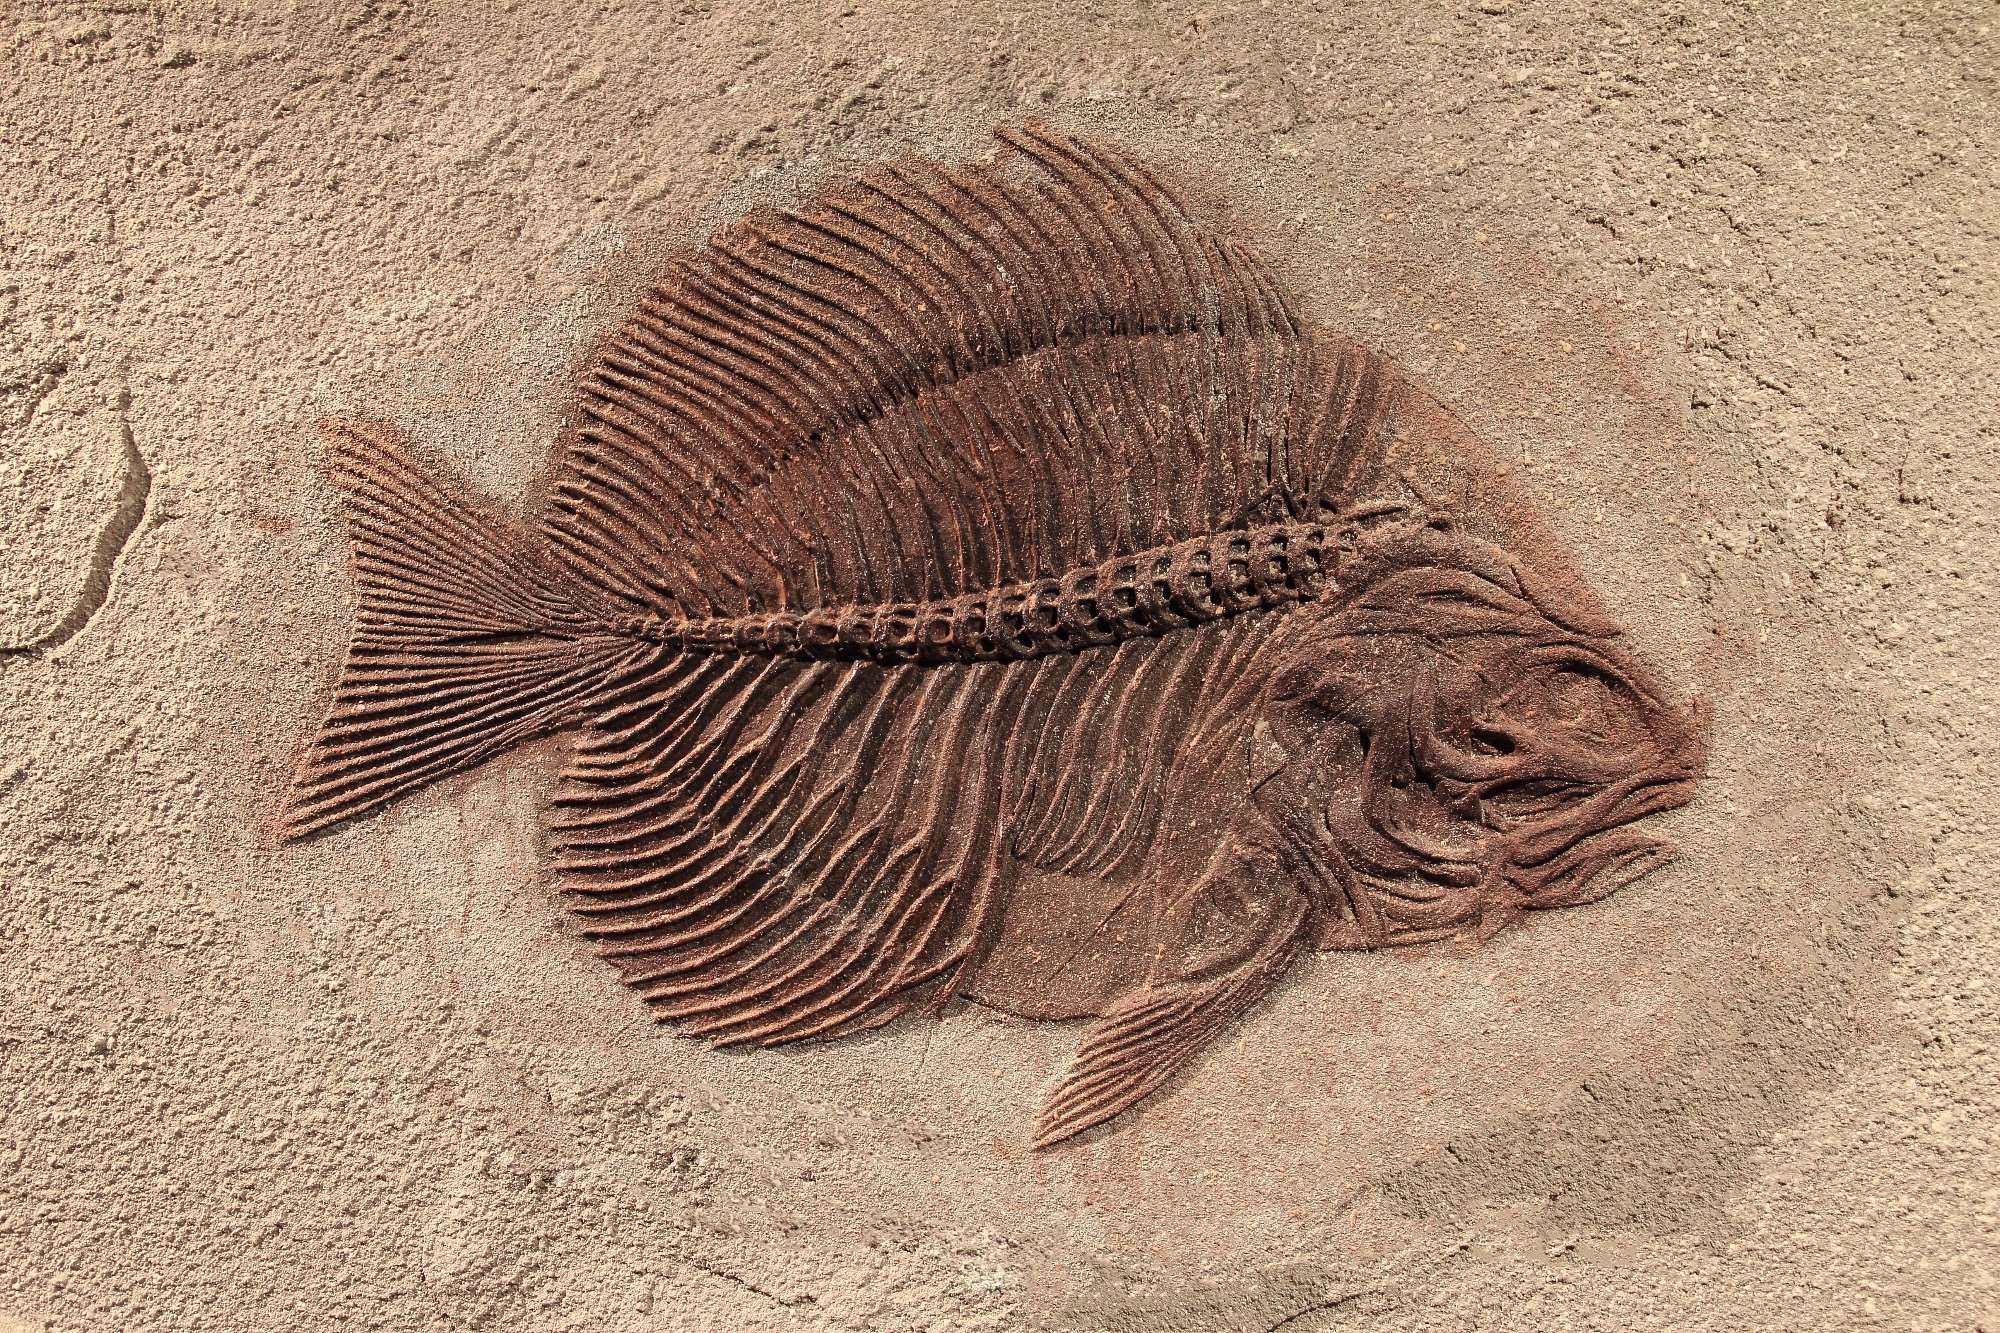 A superb and complete fossil fish with large spines. The fish is preserved within a sand coloured stone.